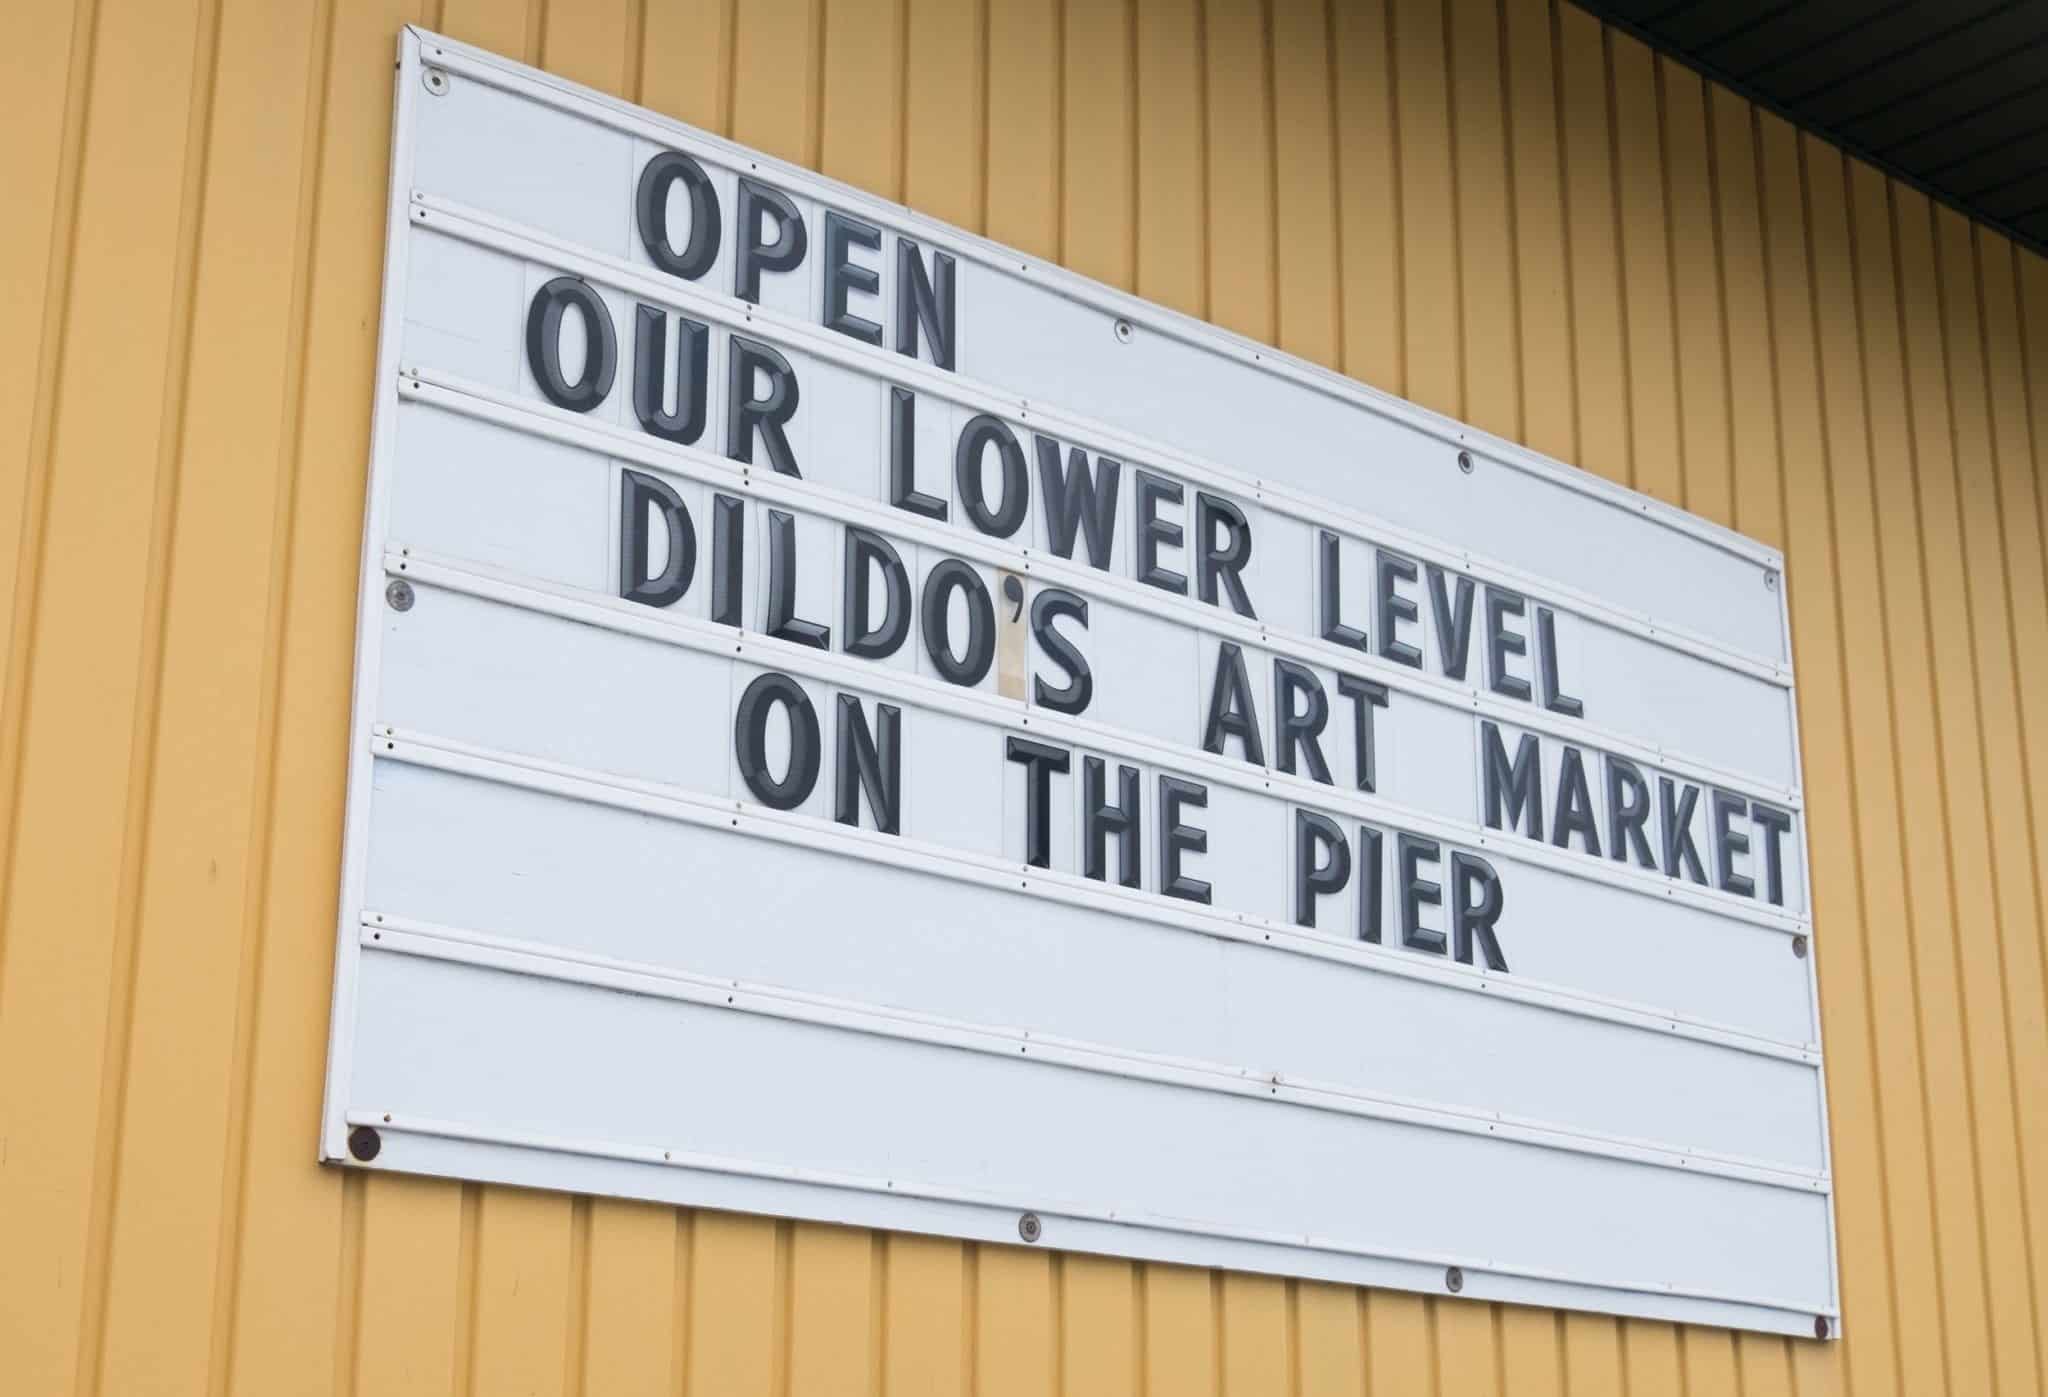 A sign that reads "Open! Our lower level. Dildo's Art Market on the Pier."